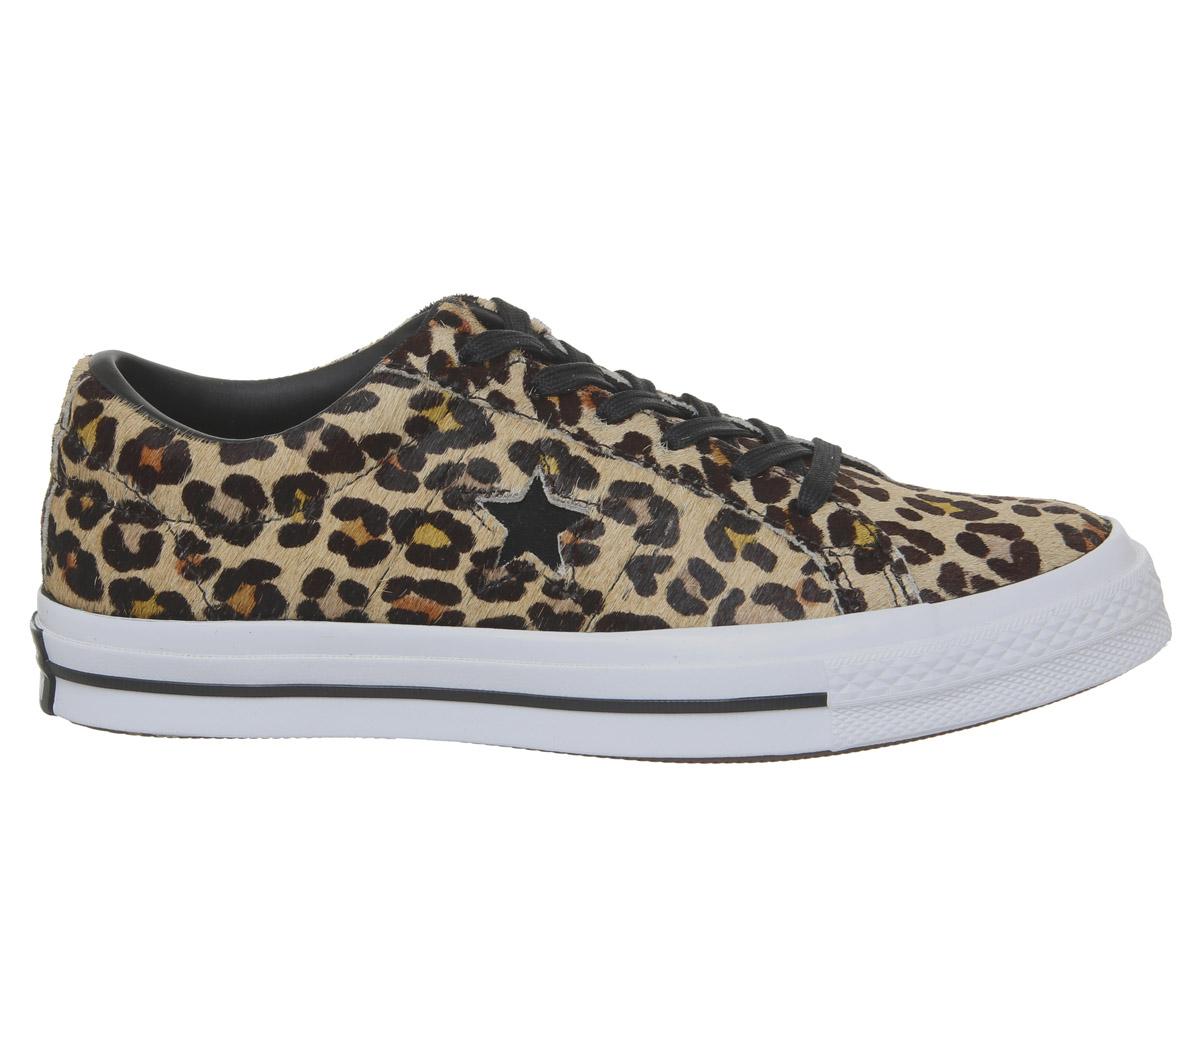 Converse One Star Trainers Leopard Black White - Women's Trainers